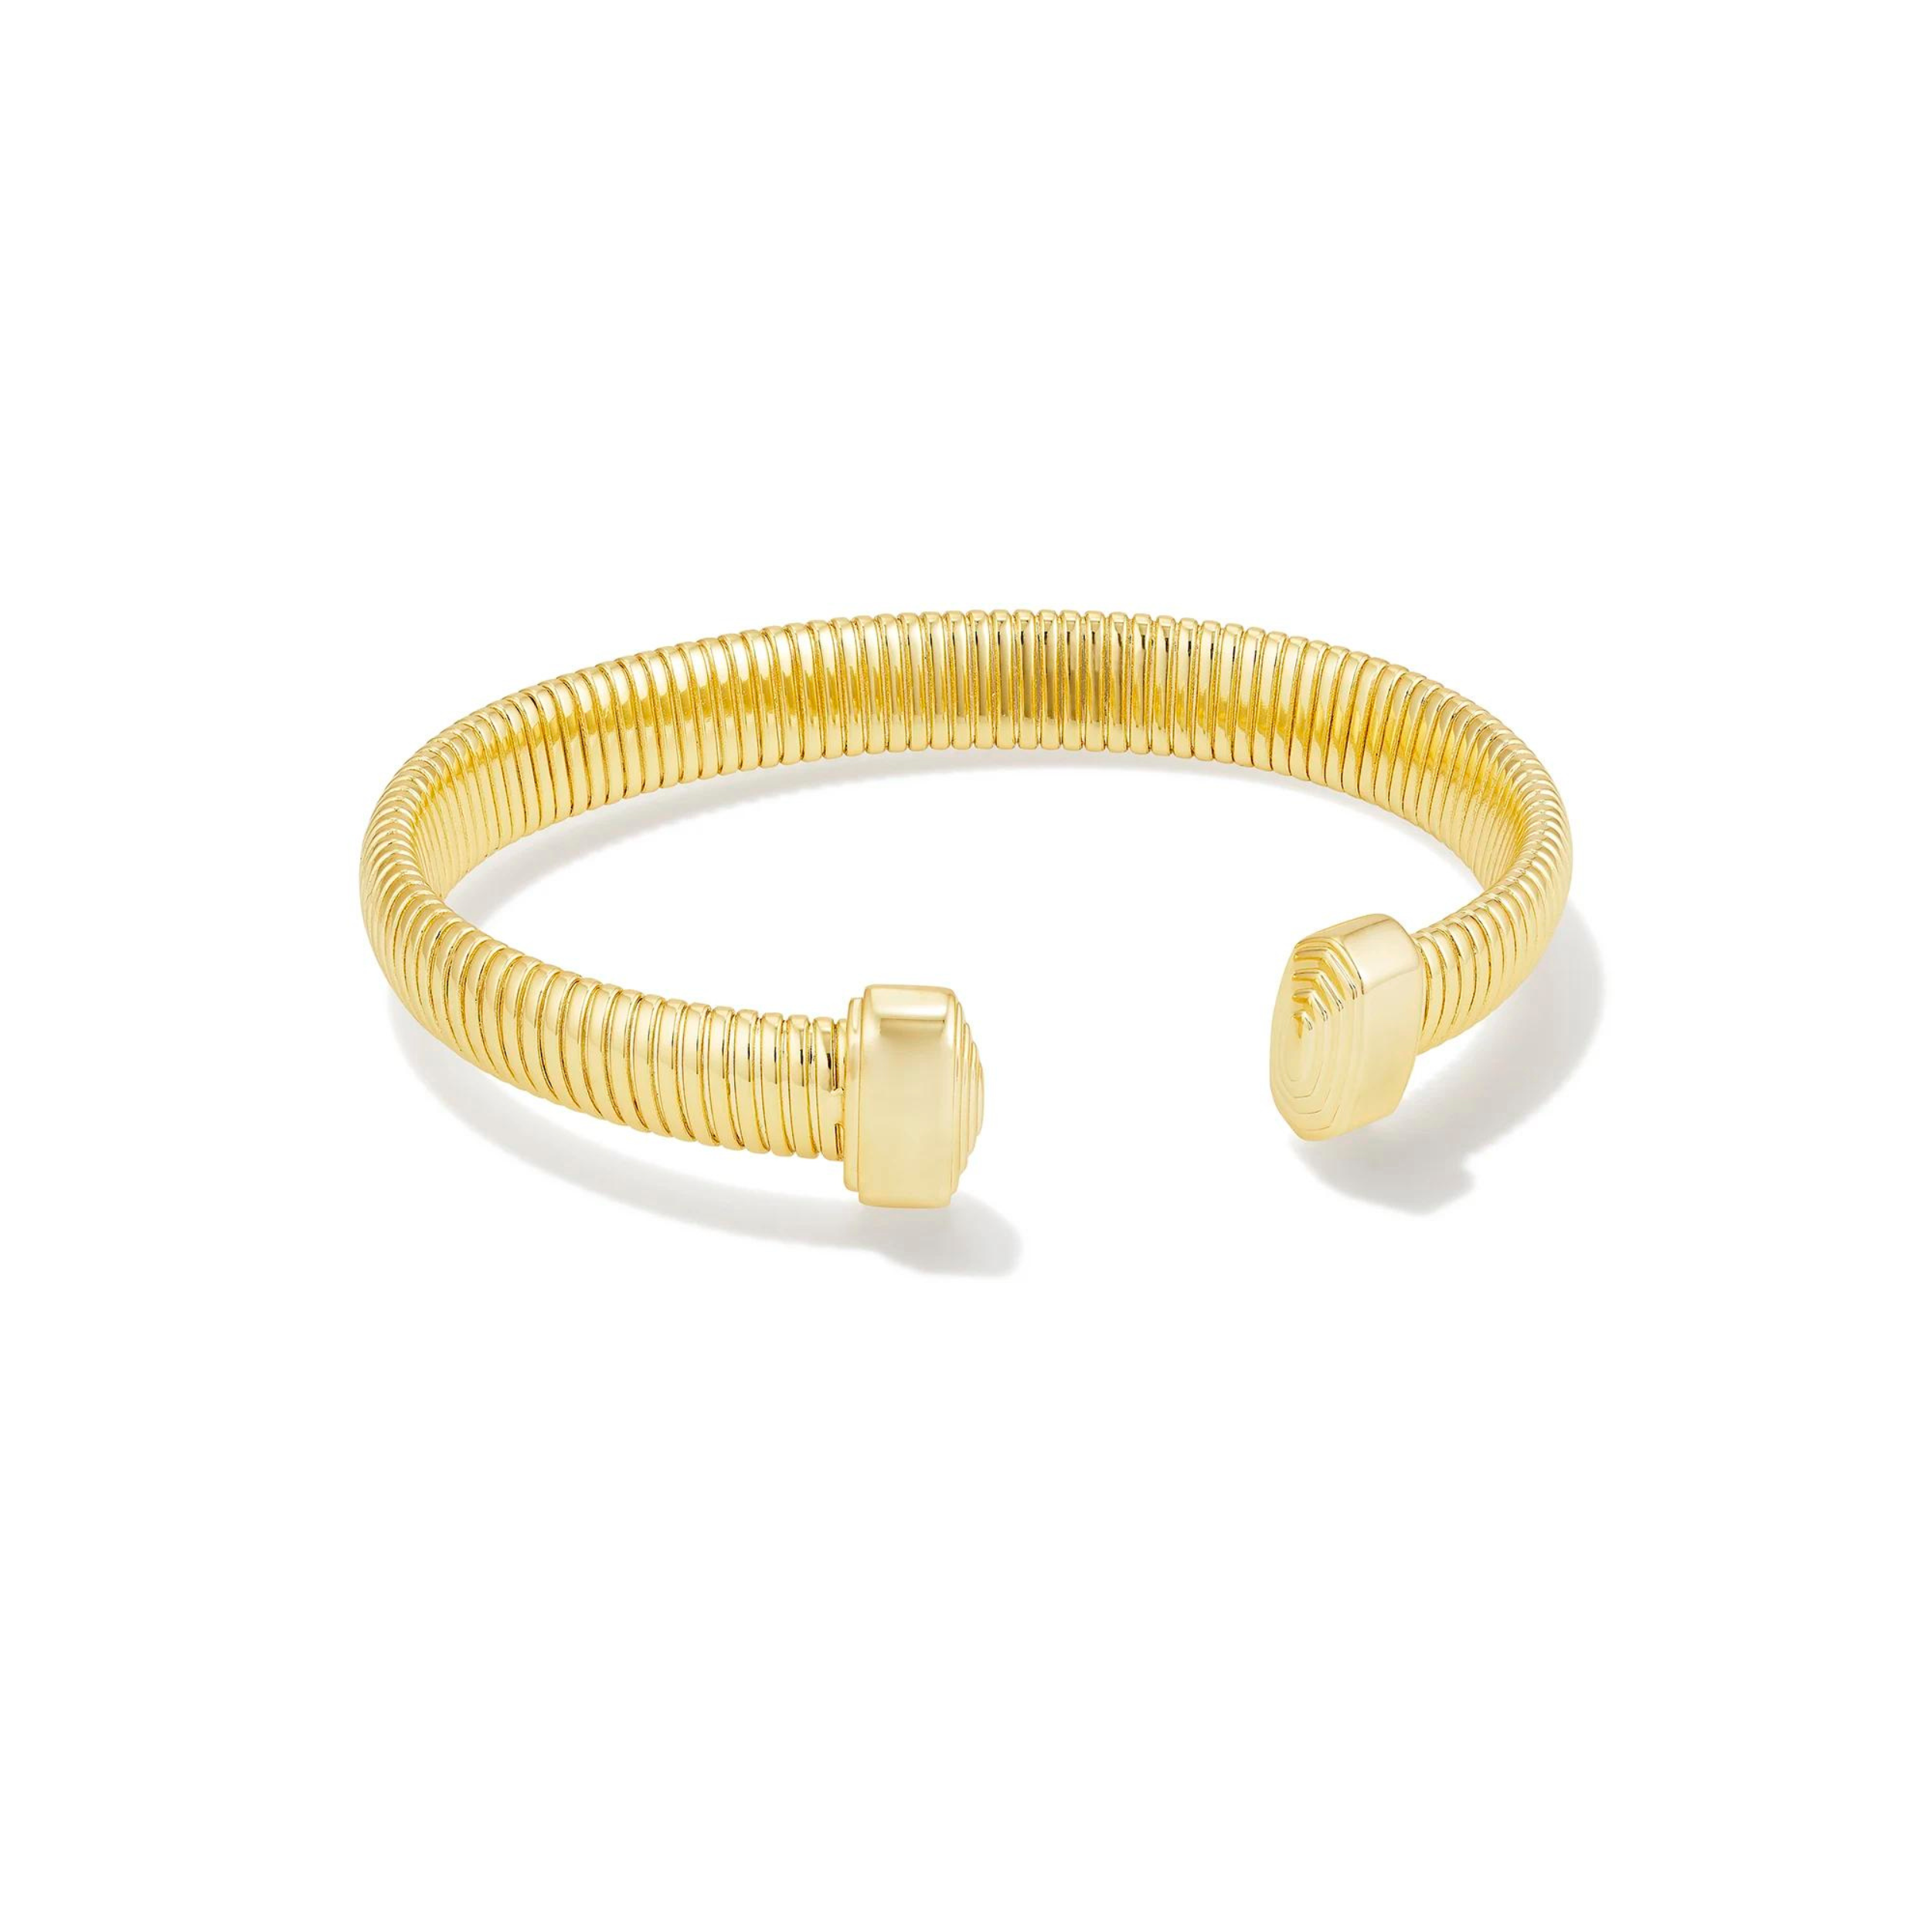 Pictured is a gold cuff bracelet with gold ends on a white background. 